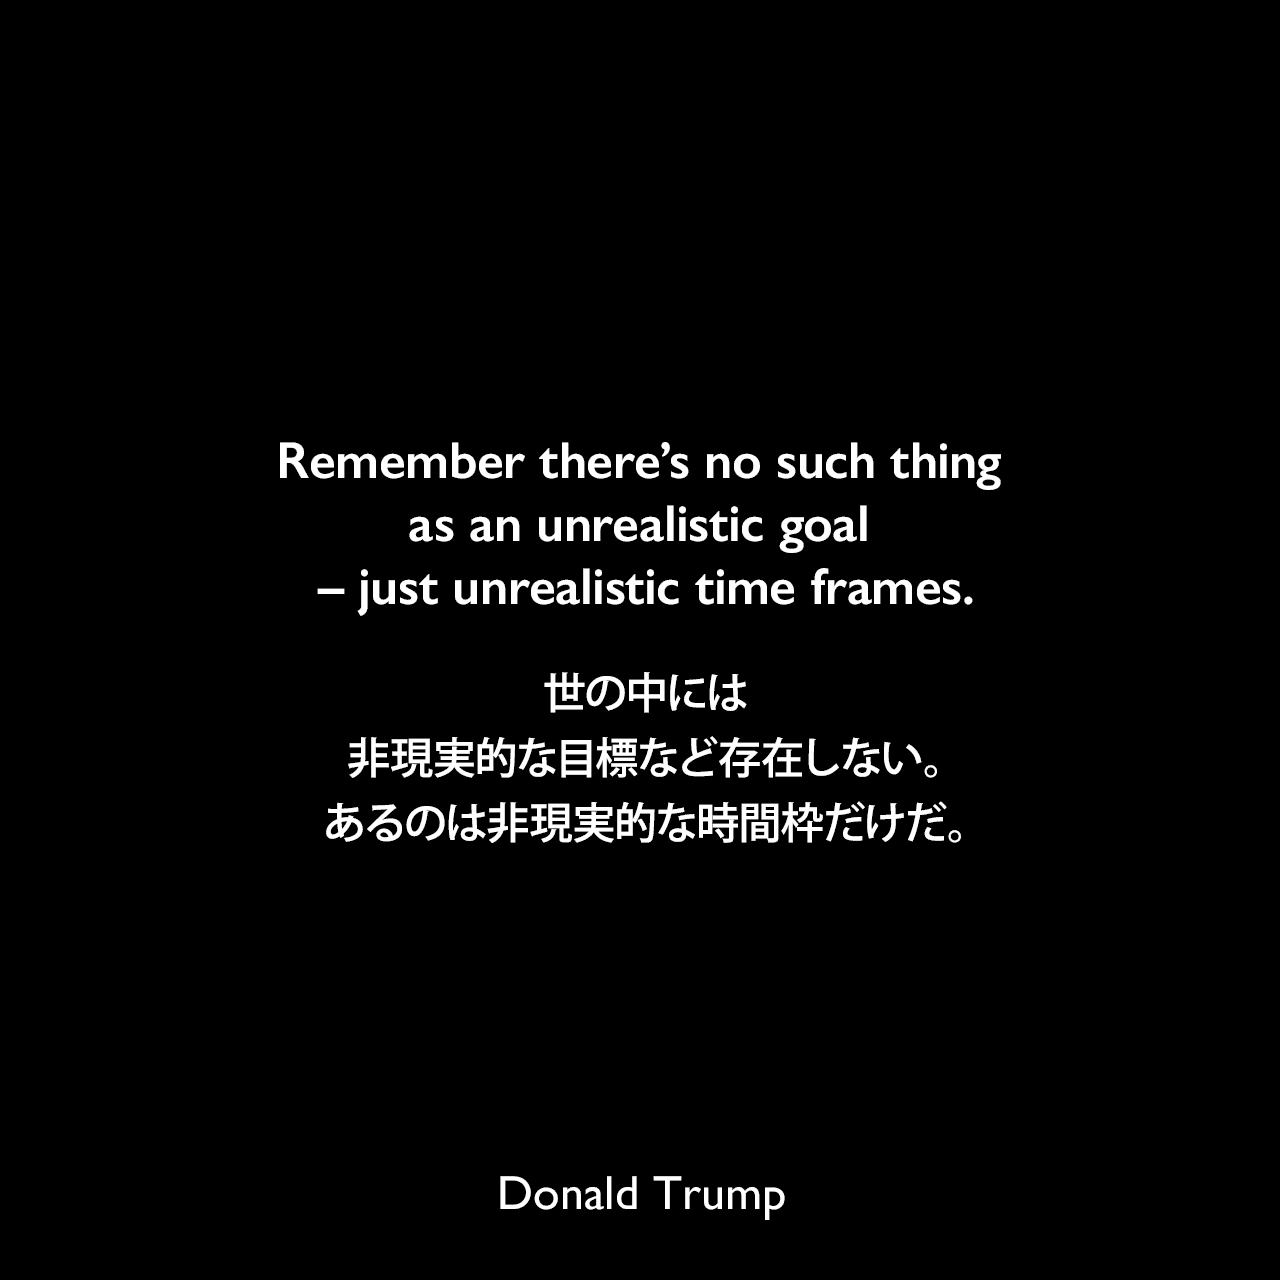 Remember there’s no such thing as an unrealistic goal – just unrealistic time frames.世の中には、非現実的な目標など存在しない。あるのは非現実的な時間枠だけだ。Donald Trump